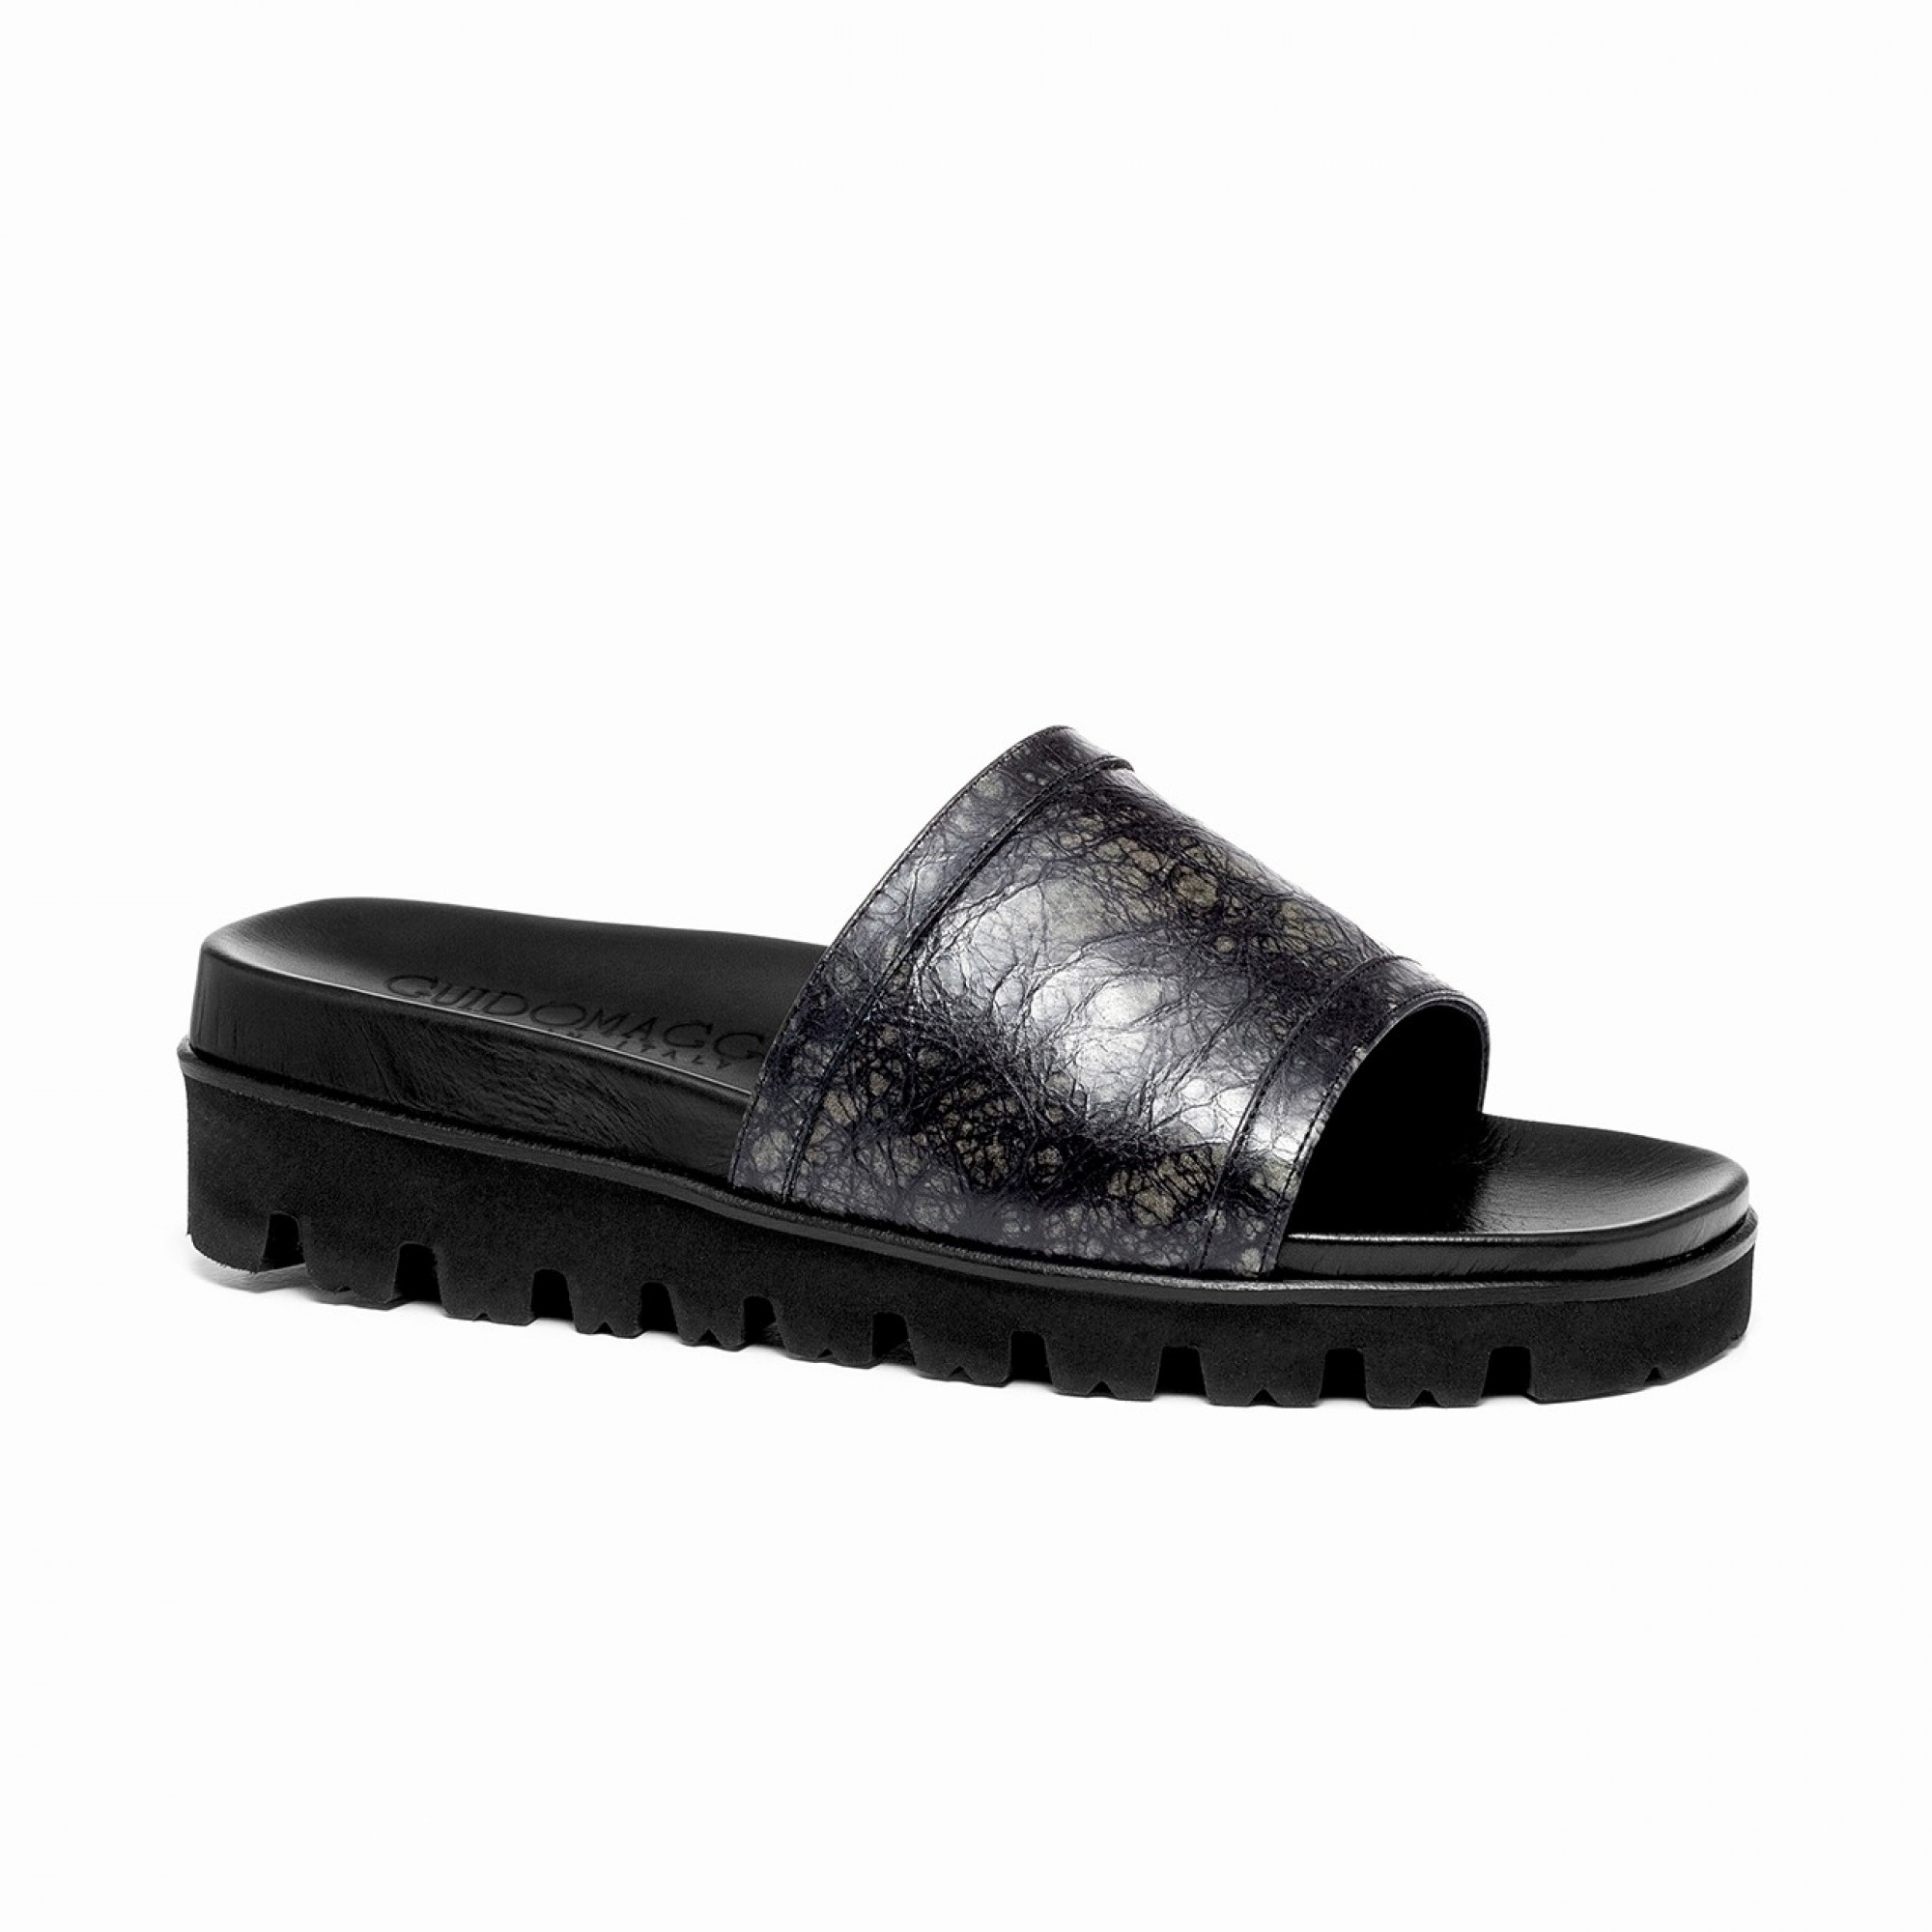 Forte dei Marmi - Elevator Sandals in Full grain Leather up to 2 inches